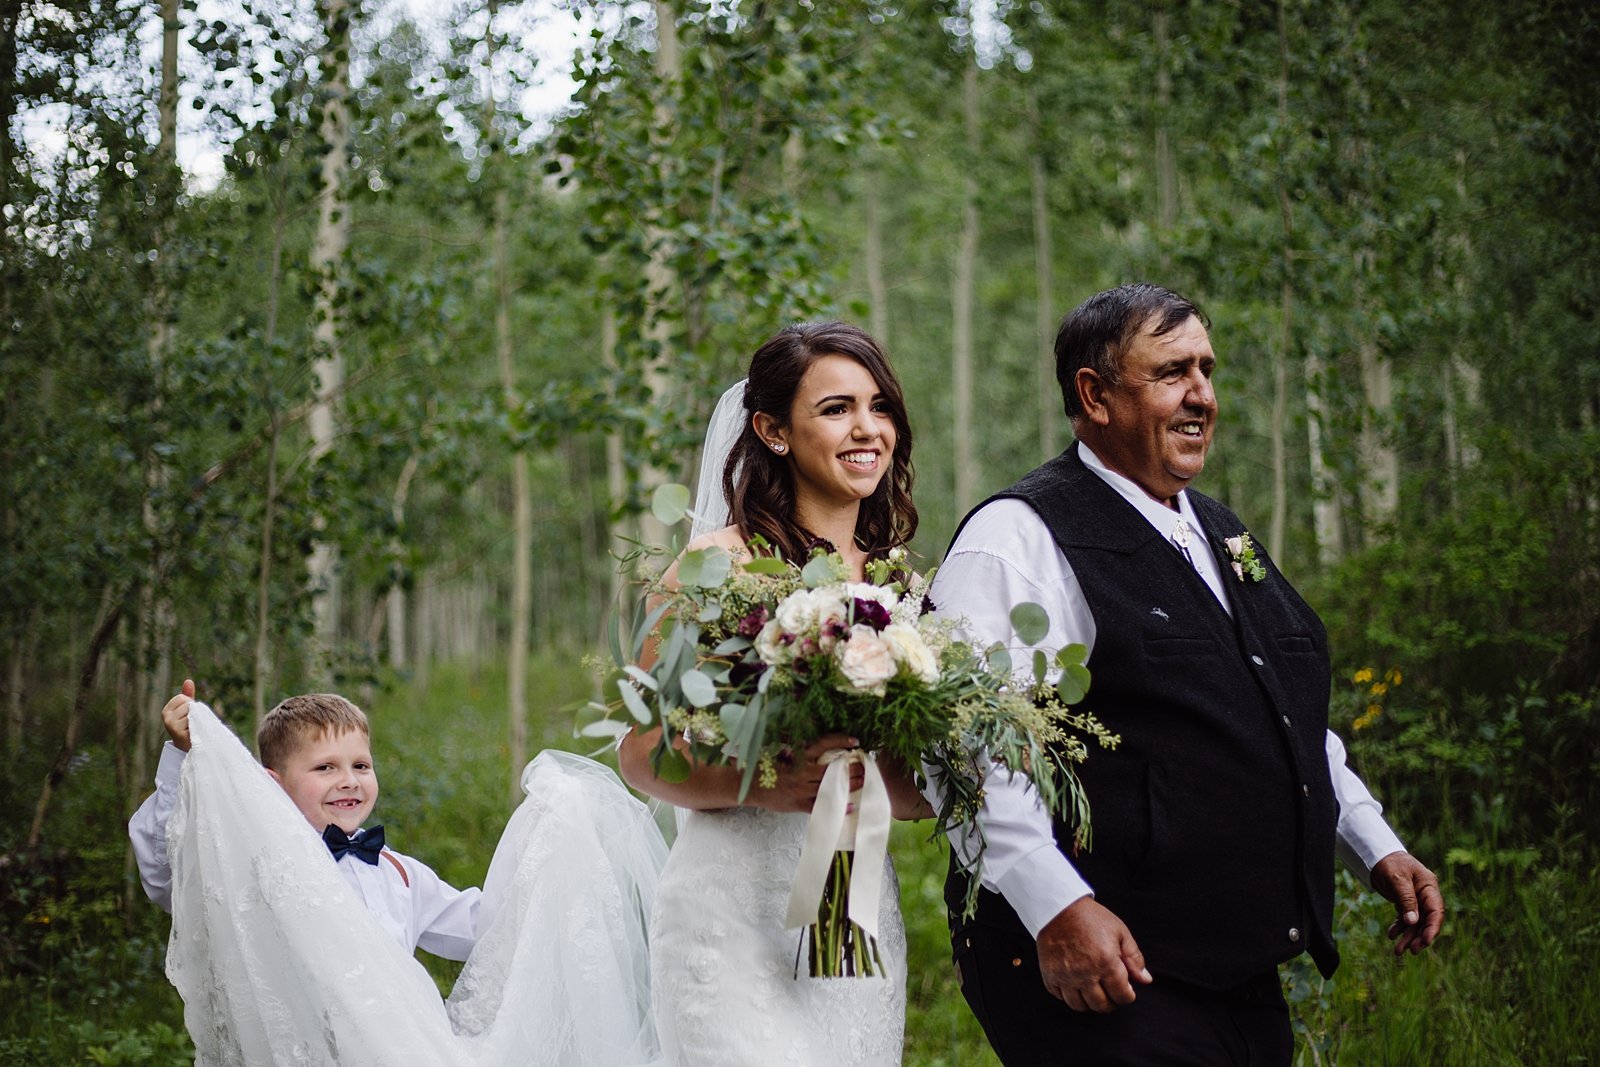 ring bearer carrying bride's train, father of the bride walking bride down the aisle, breckenridge forest wedding, breckenridge mountain resort wedding, breckenridge outdoor summer elopement